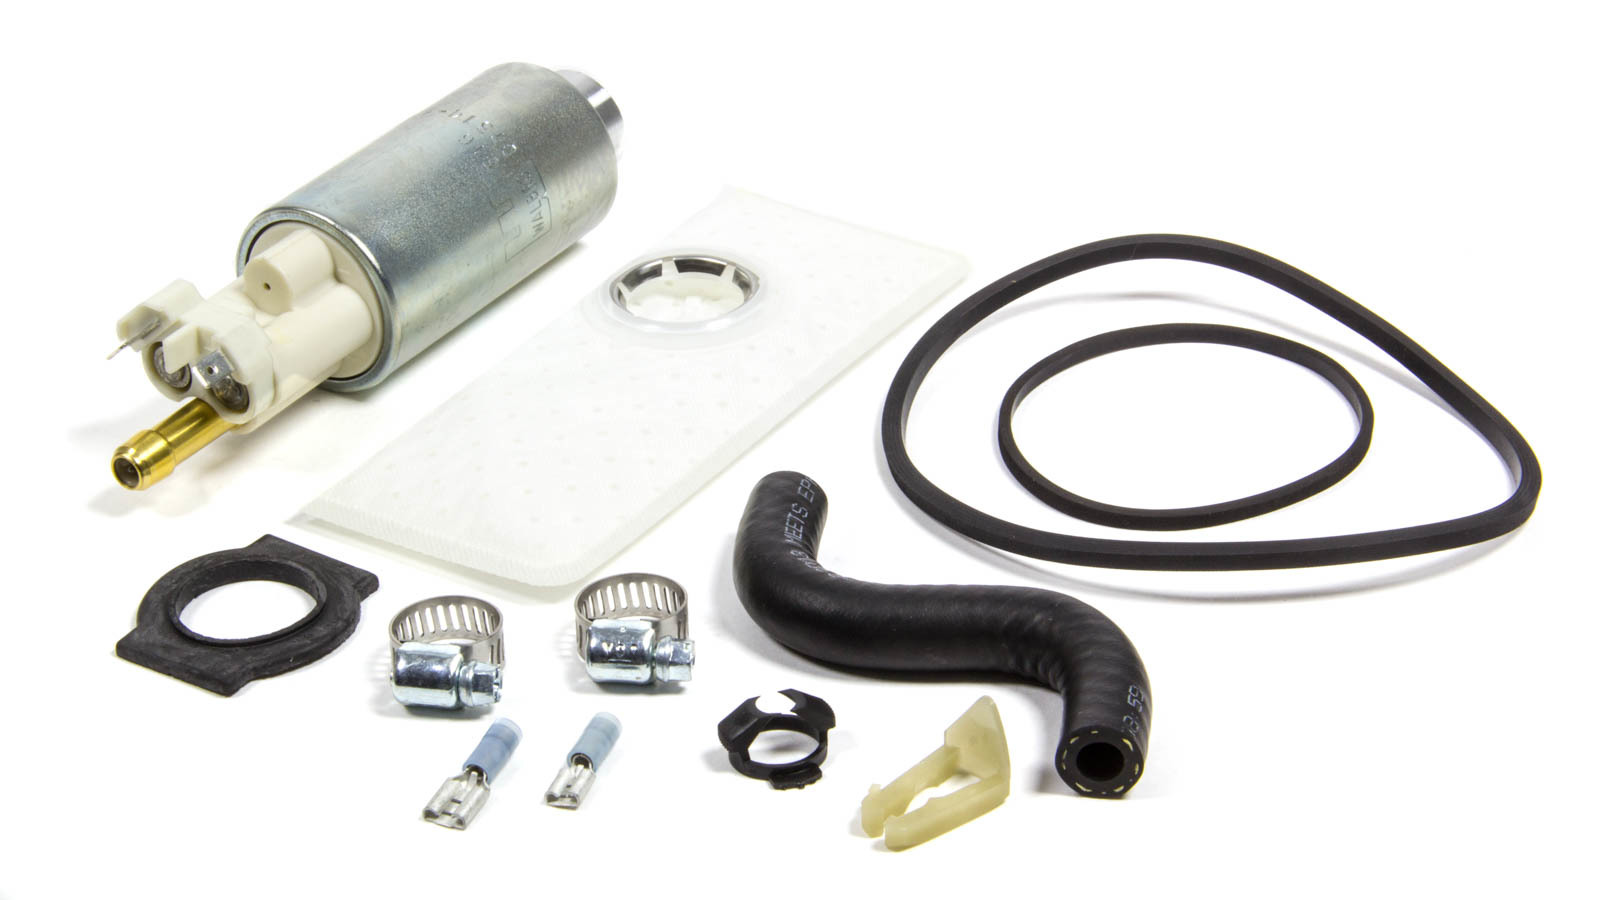 Walbro 5CA249 Fuel Pump, Electric, In-Tank, 155 lph, Install Kit, Gas, Ford Mustang 1985-97, Kit